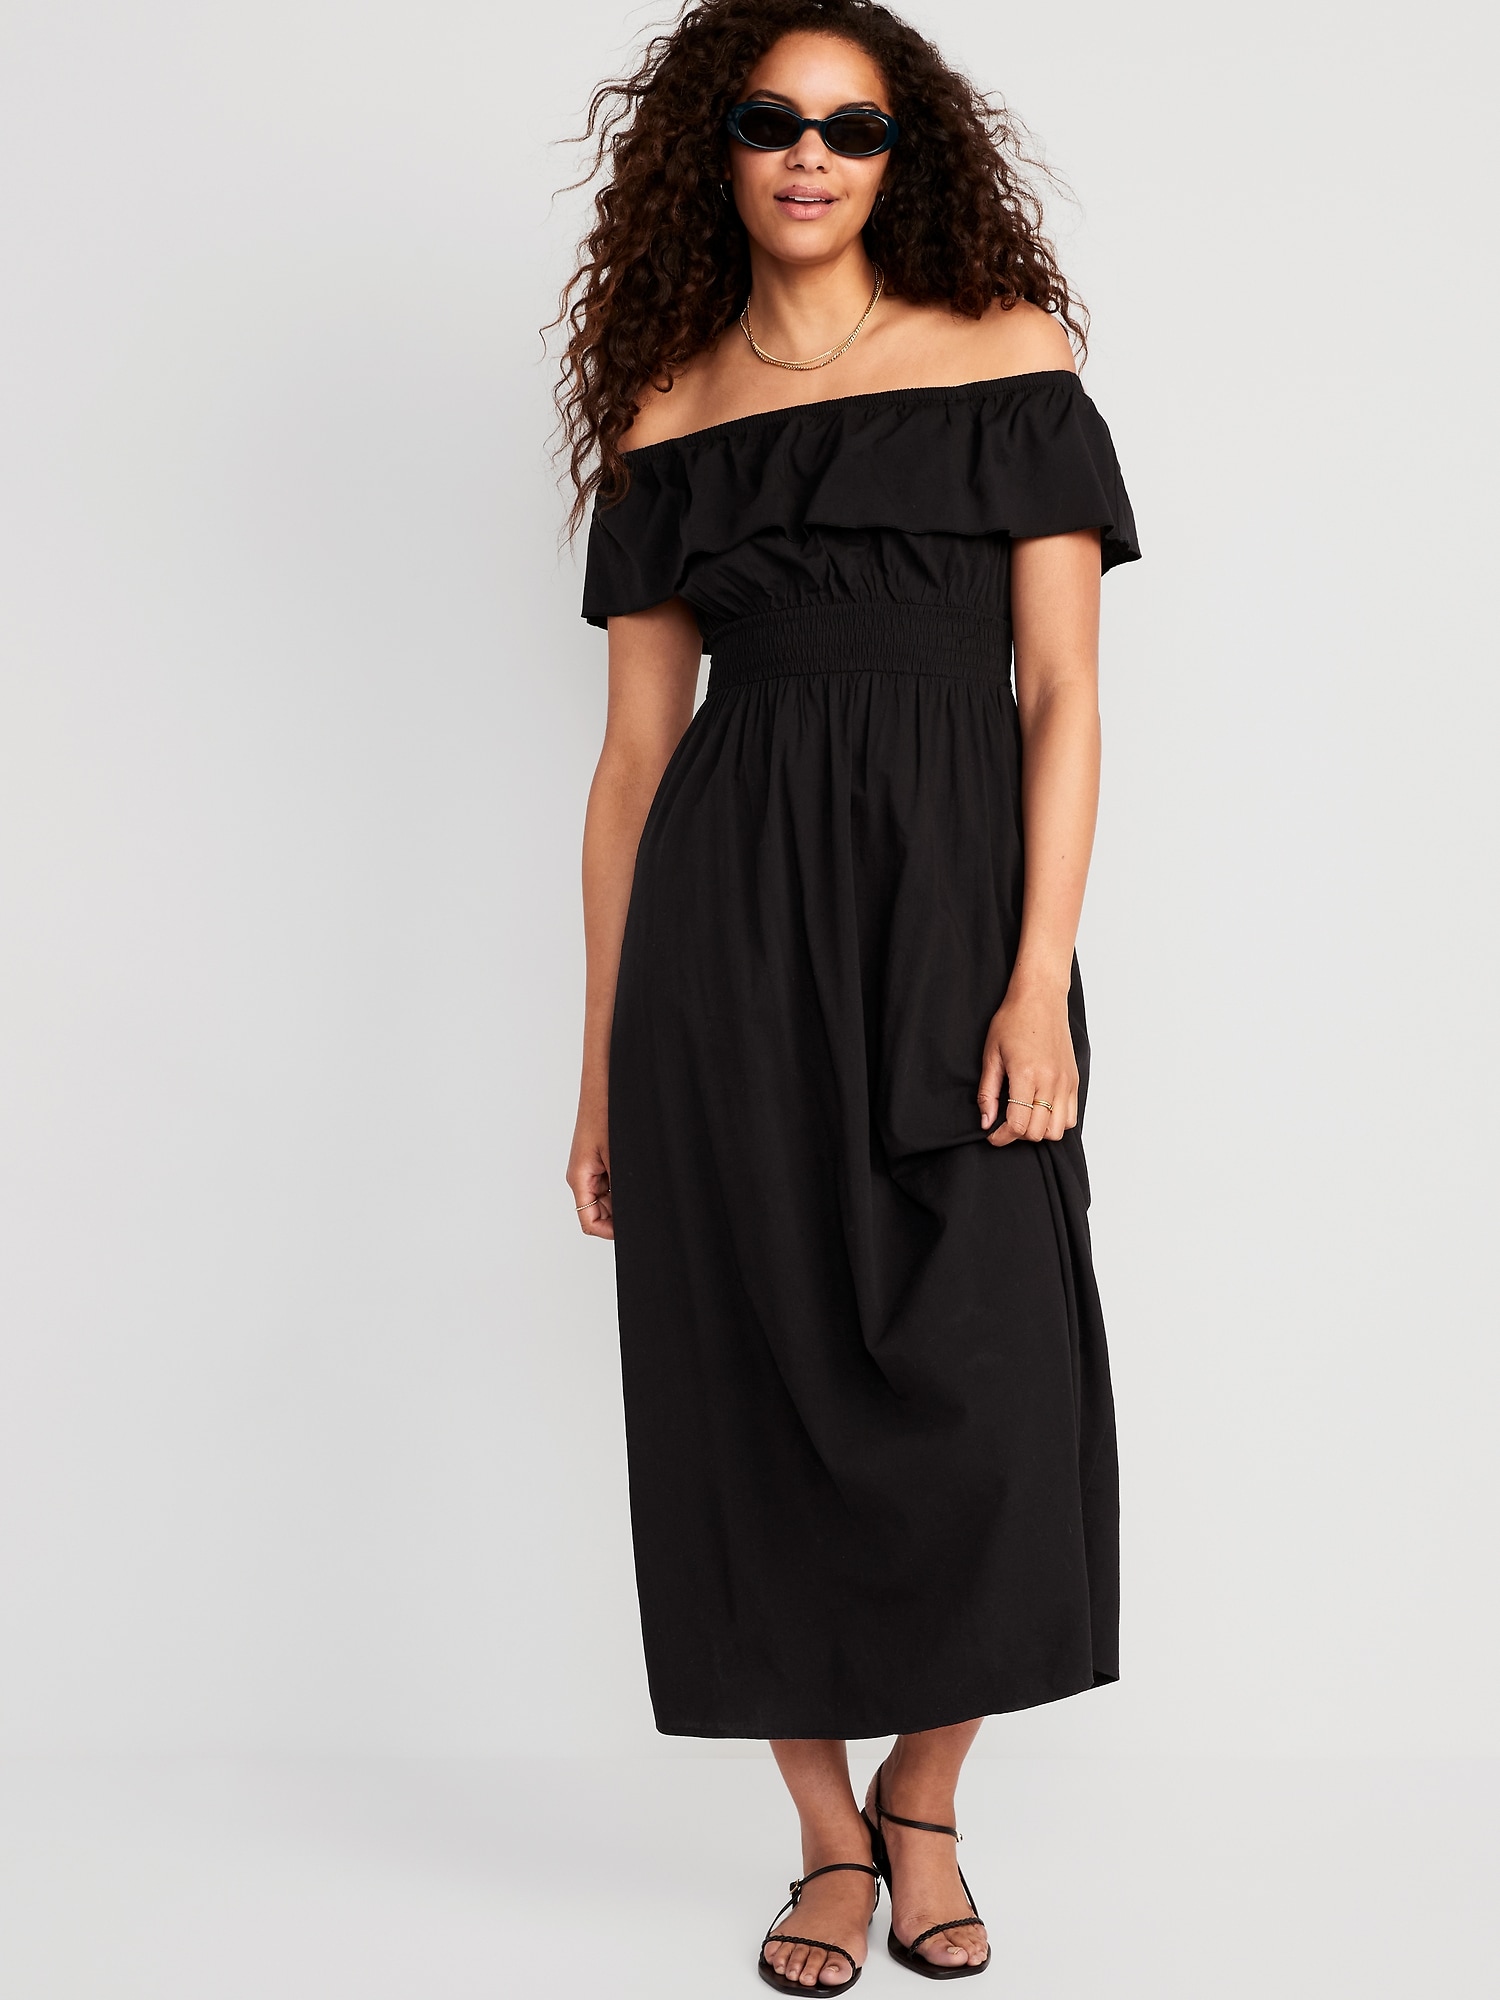 Waist Defined Ruffled Off The Shoulder Smocked Maxi Dress Old Navy